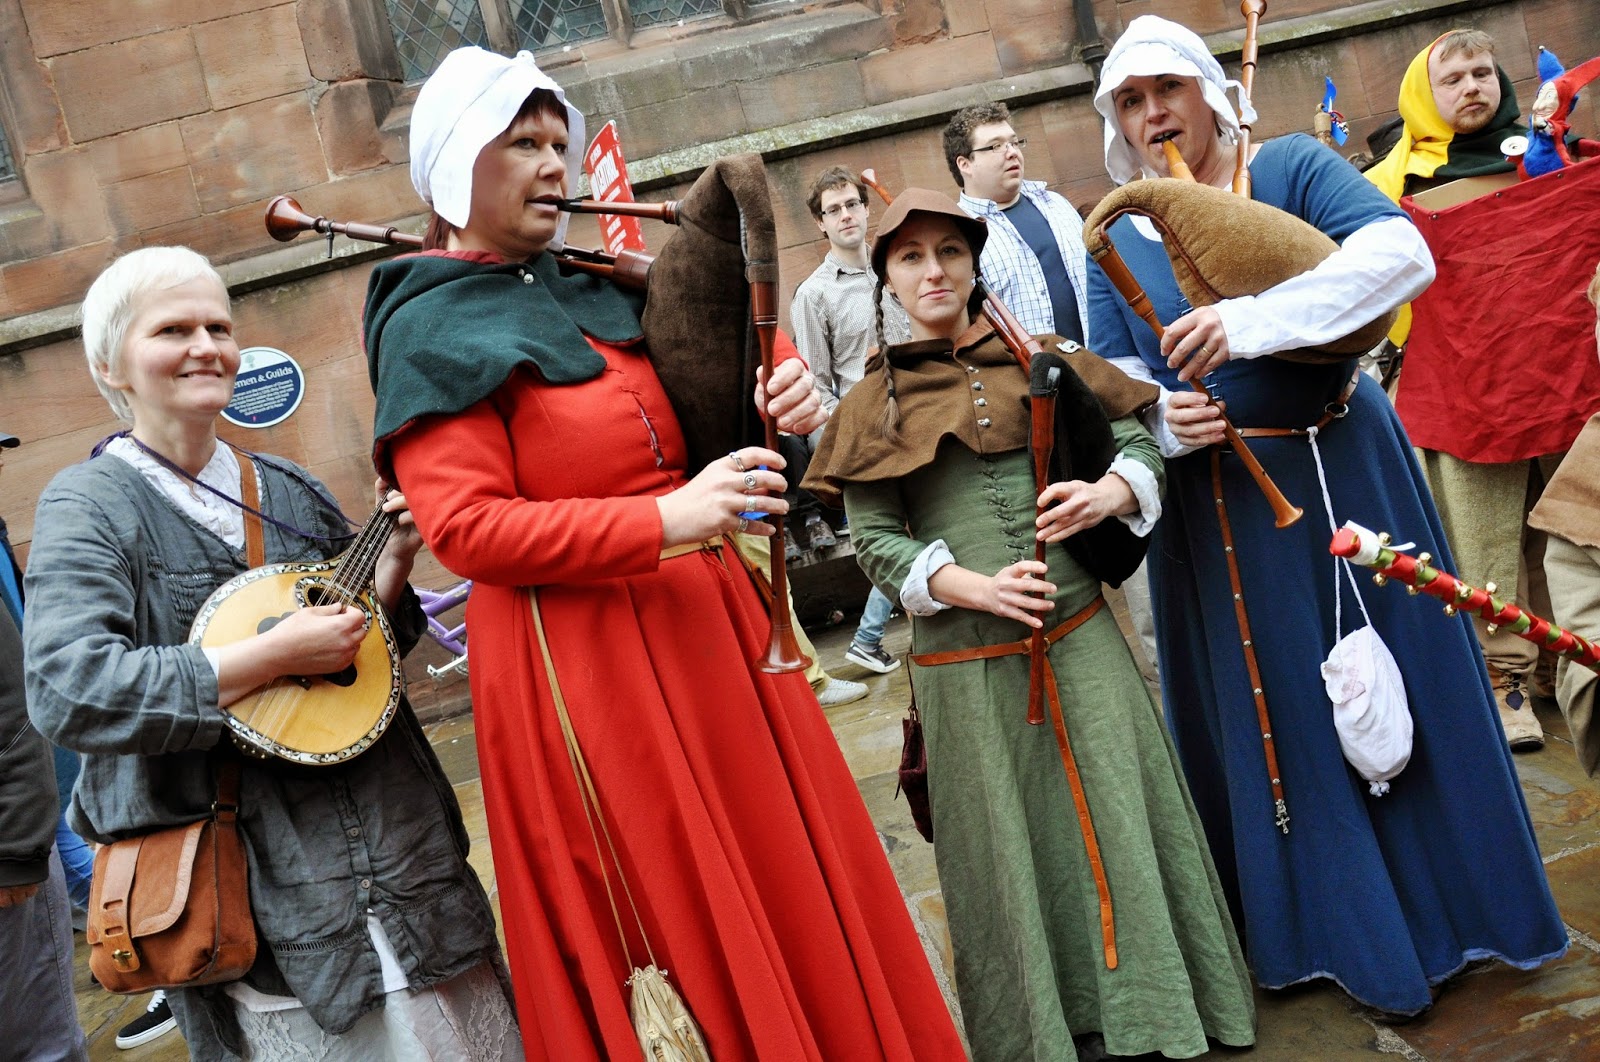 Pilgrims and Posies: Medieval Merriment with the Minstrels